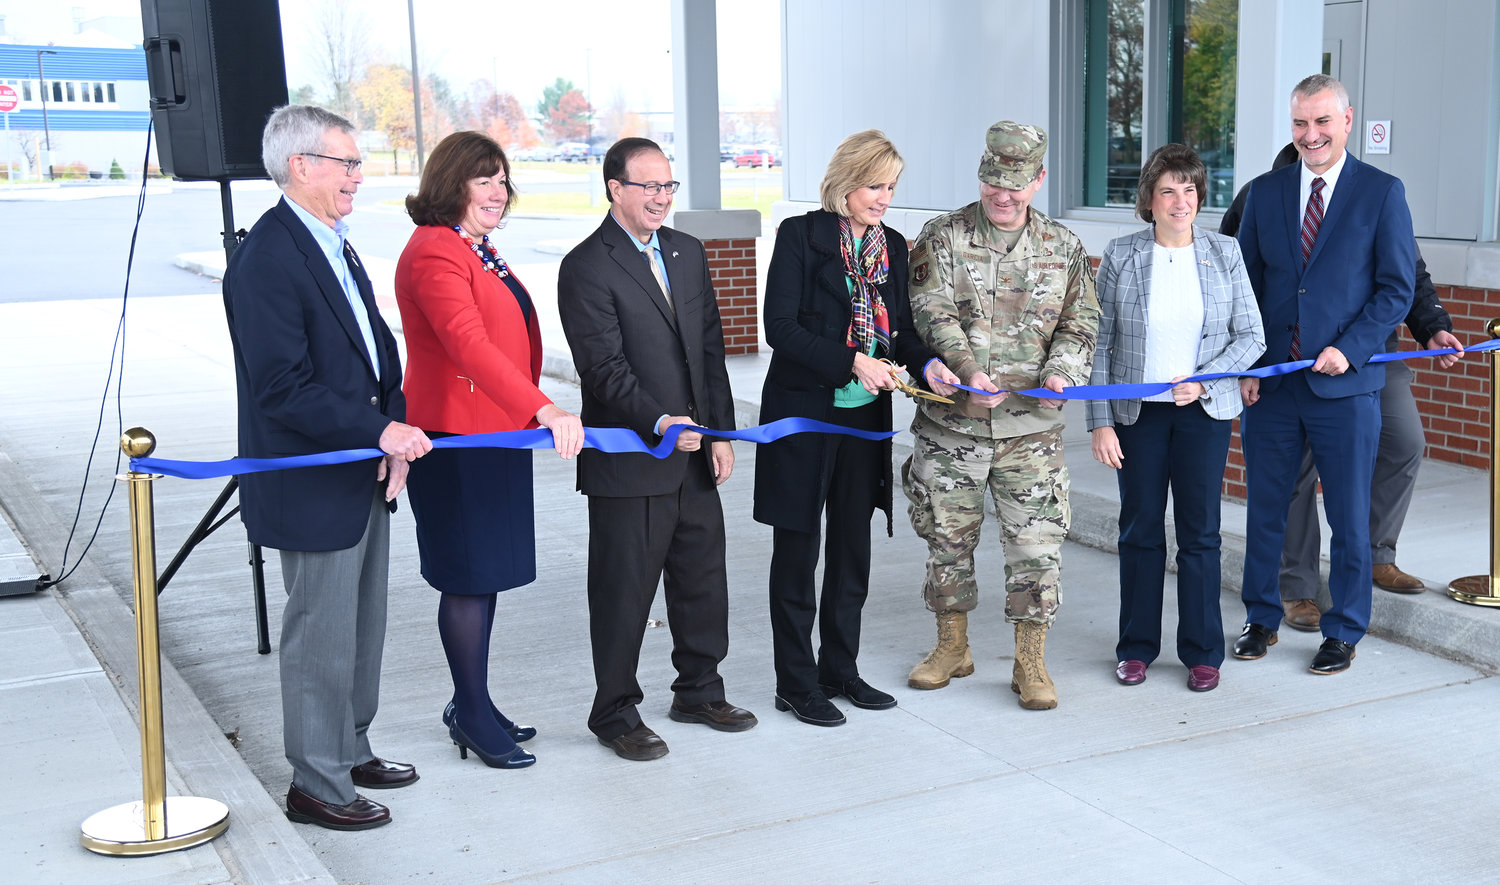 Local dignitaries and Air Force Research Laboratory personnel cut the ribbon on the new $14.8 million visitor control center and security perimeter at the AFRL Tuesday. From left: Don Hanson, retired director of the AFRL Information Directorate; Assemblywoman Marianne Buttenschon, D-119, Marcy; Sen. Joseph A. Griffo, R-47, Rome; Congresswoman Claudia Tenney, R-22, New Hartford; Col. Fred Garcia II, director of the Information Directorate; Mayor Jacqueline M. Izzo; Michael Hayduk, deputy director of the Information Directorate; and at rear, Kyle Davis, project engineer with the U.S. Army Corps of Engineers.